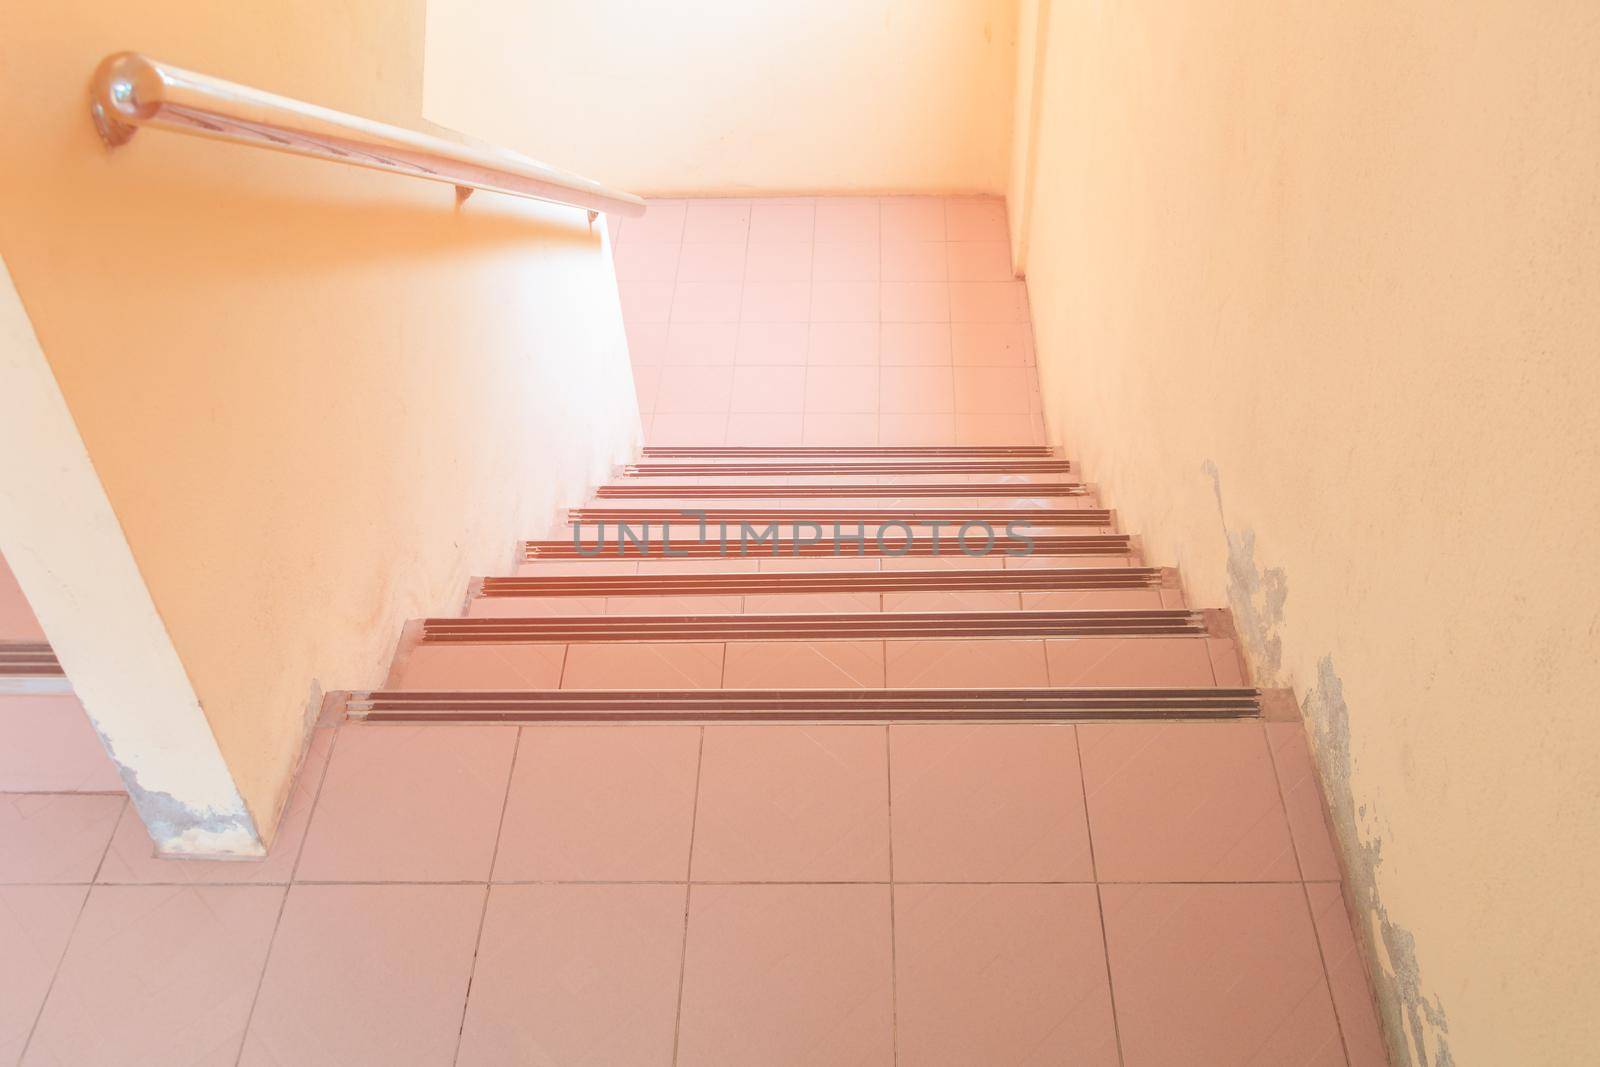 stairs walkway down terrazzo floor. select focus with shallow depth of field by pramot